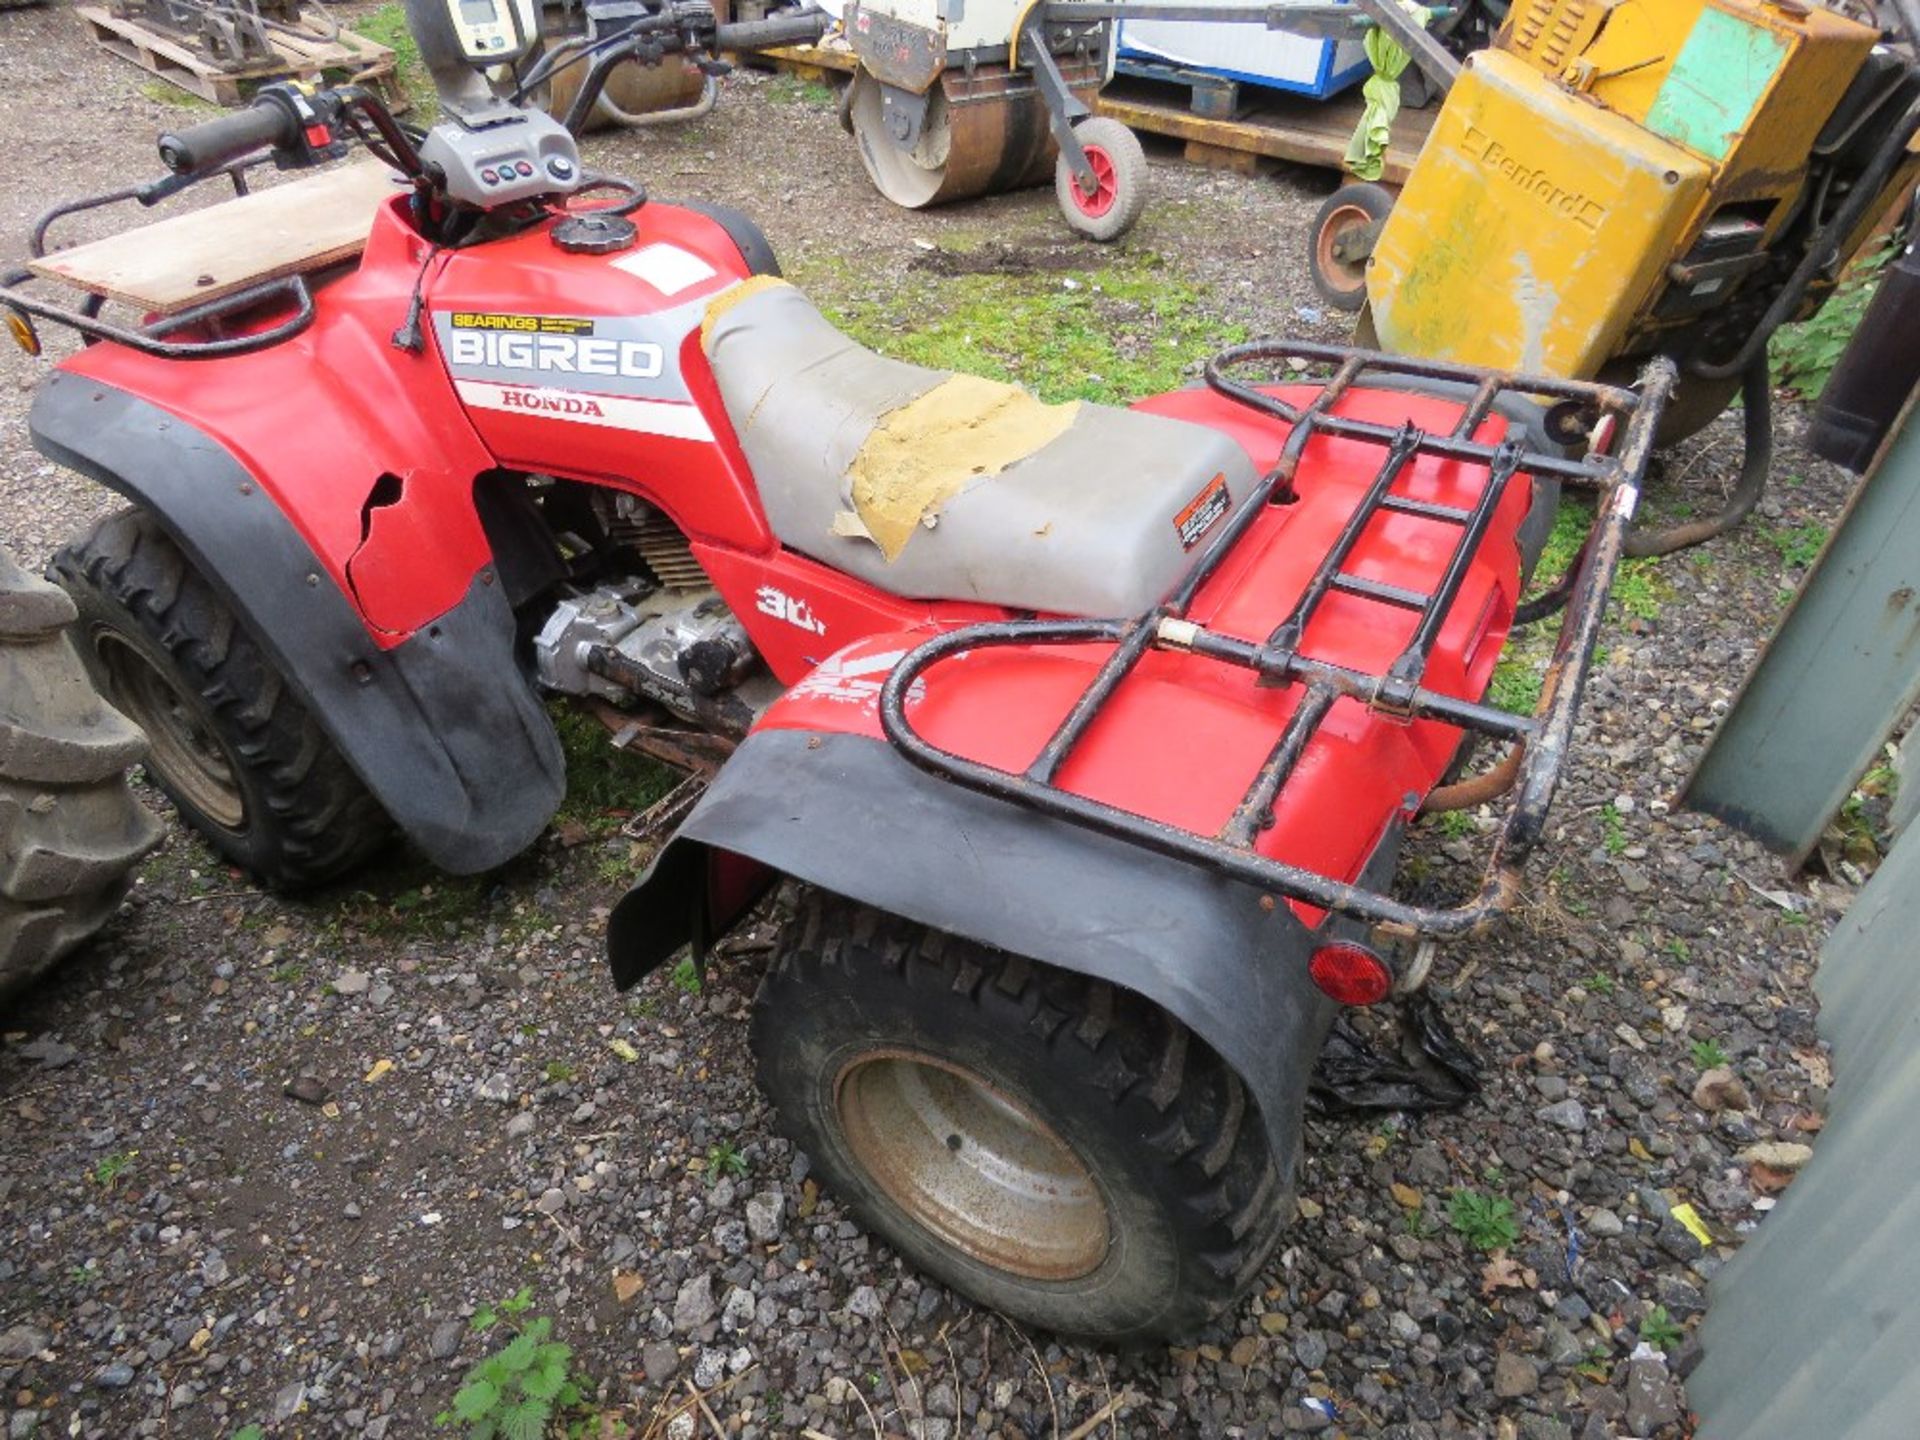 HONDA BIG RED 4WD PETROL ENGINED QUAD BIKE. WHEN TESTED WAS SEEN TO DRIVE, STEER AND BRAKE SOURCED F - Image 6 of 9